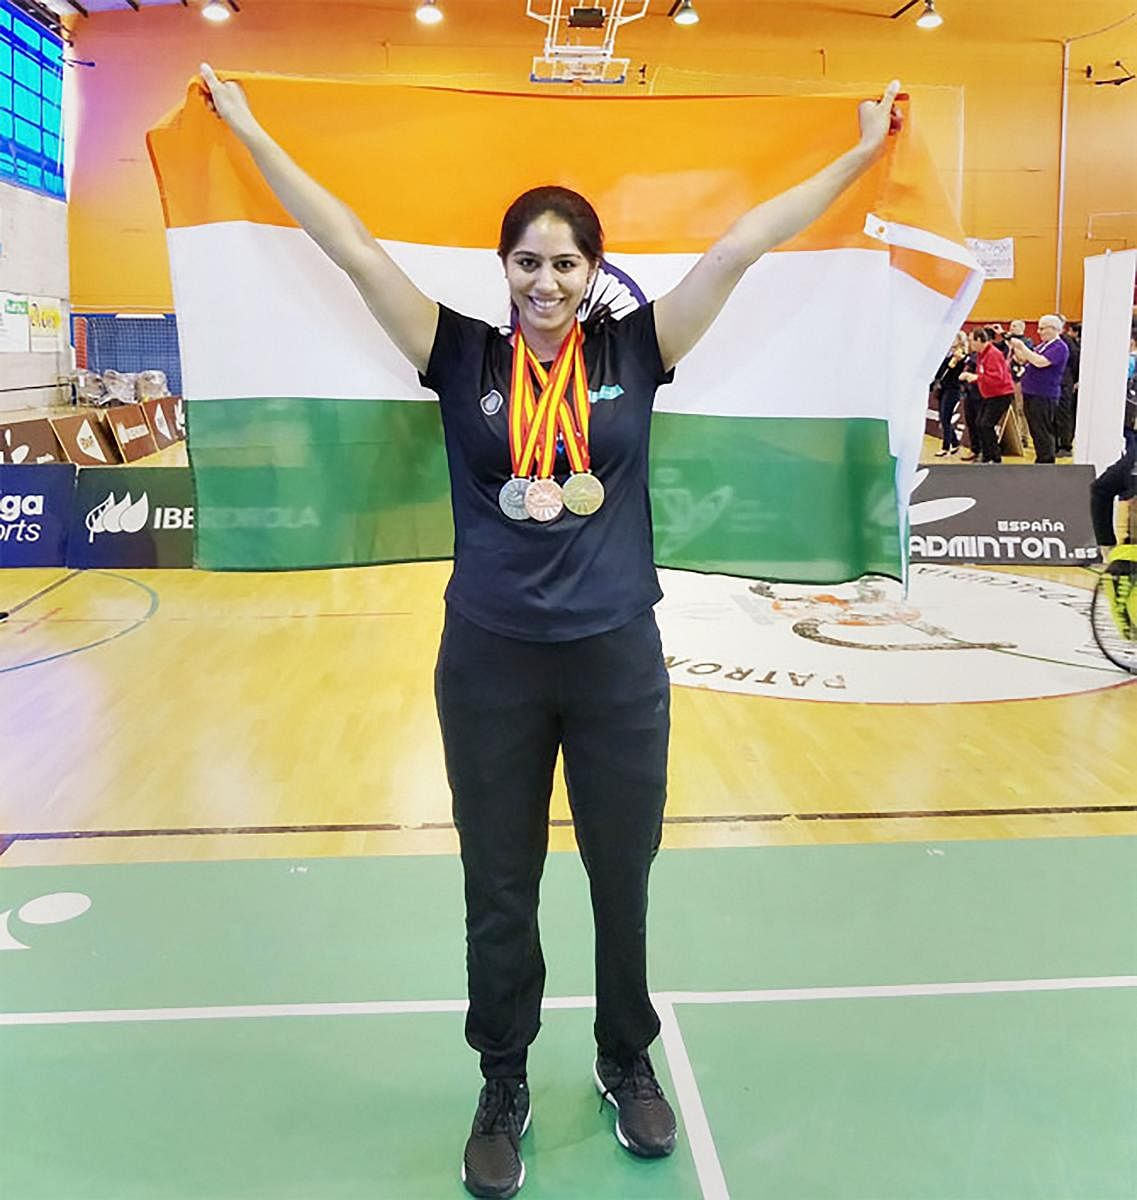 Para-badminton player Manasi Joshi poses for pictures after winning her first World Championships in the women’s singles SL3 finals at Basel 2019 Championships. PTI Photo